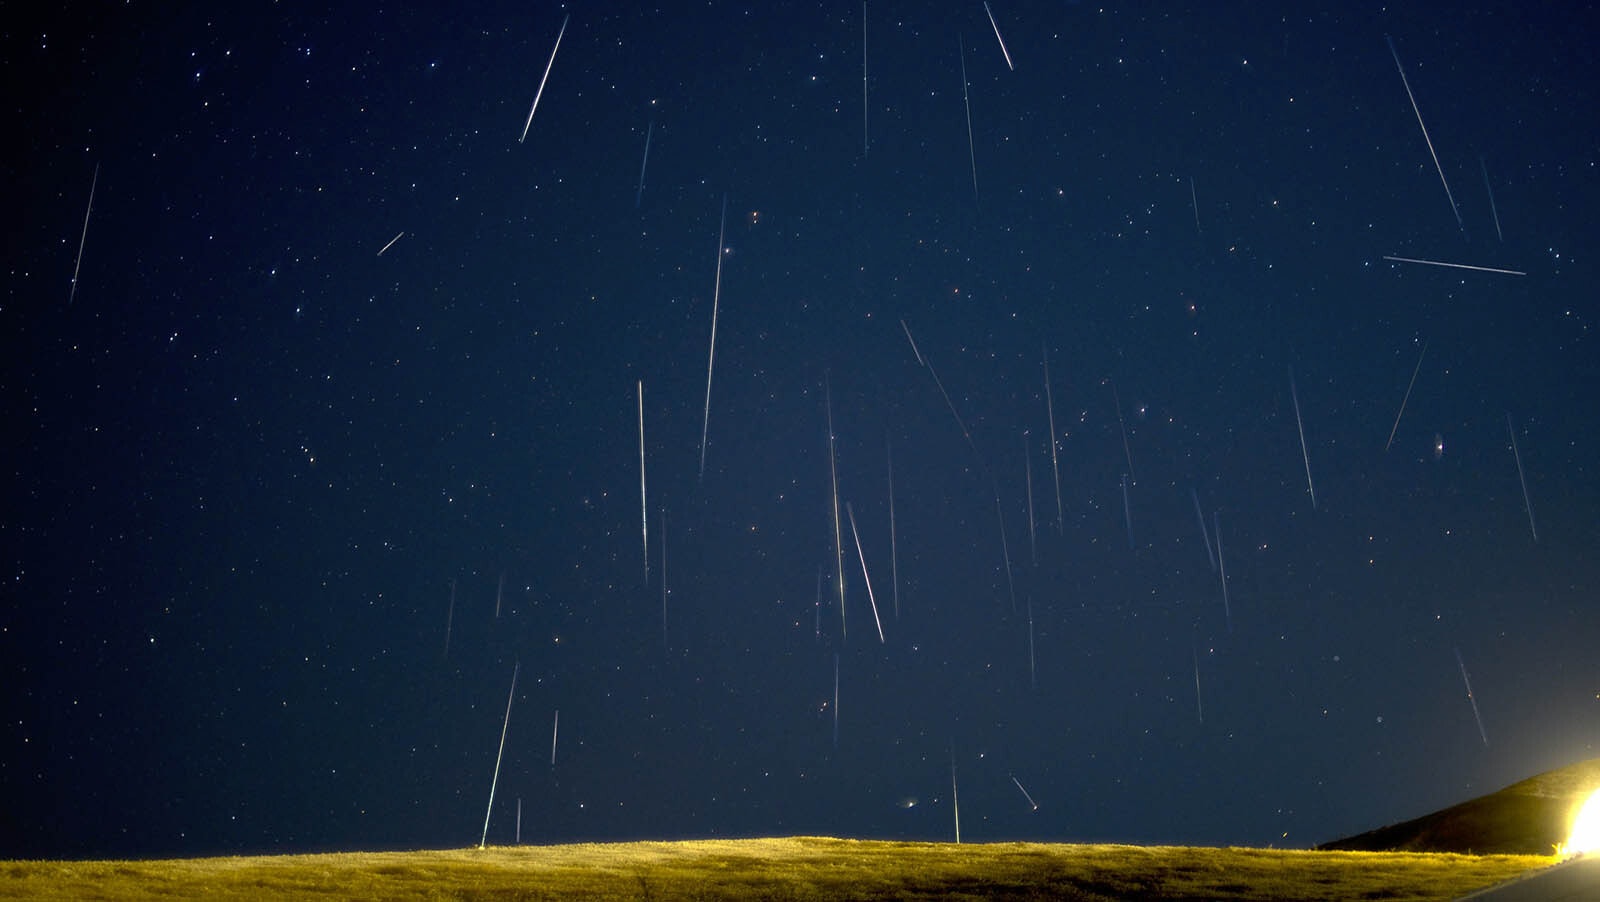 A veritable shower of Gemini's raining down on the horizon. This image was created by taking exposures every 10 seconds for 10 hours, recording 69 meteors, 49 of which are in this image.